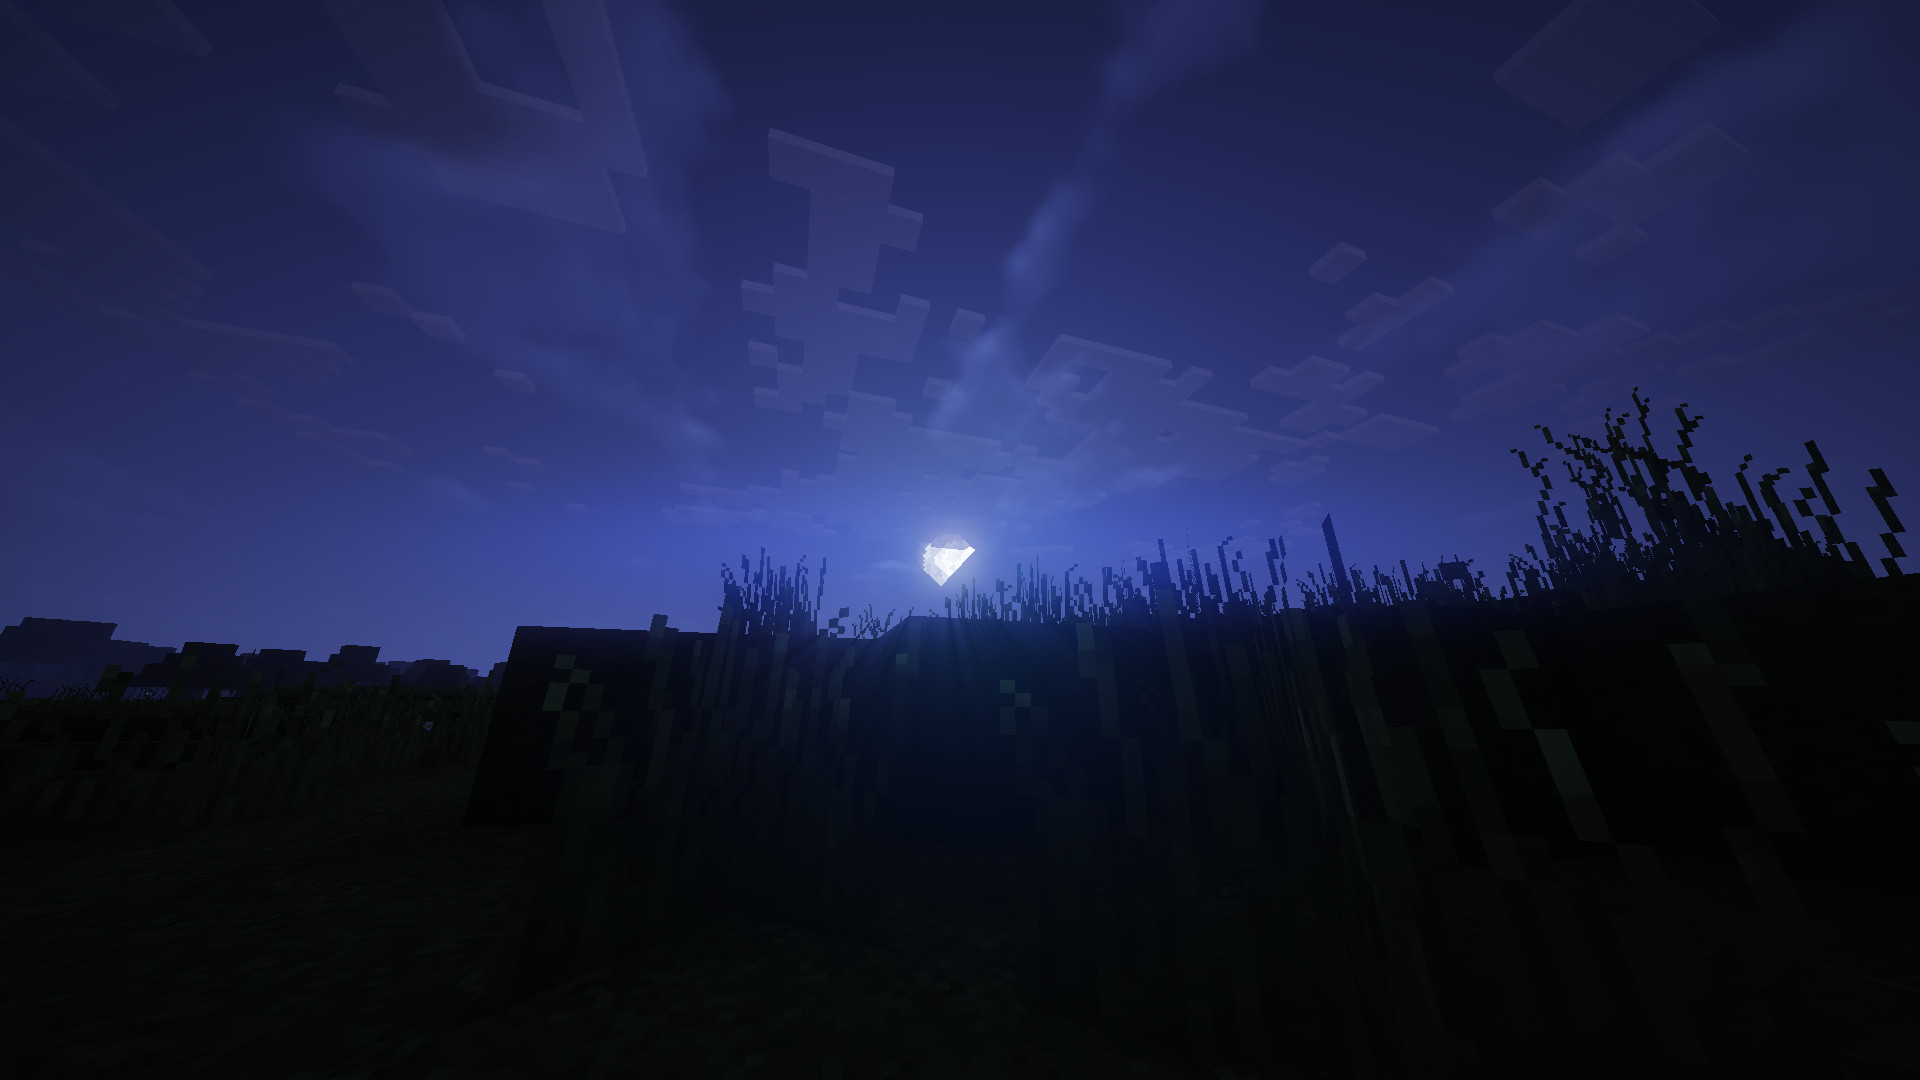 Minecraft Ultra Shaders Wallpapers 1080p Hd 40 1920x1080